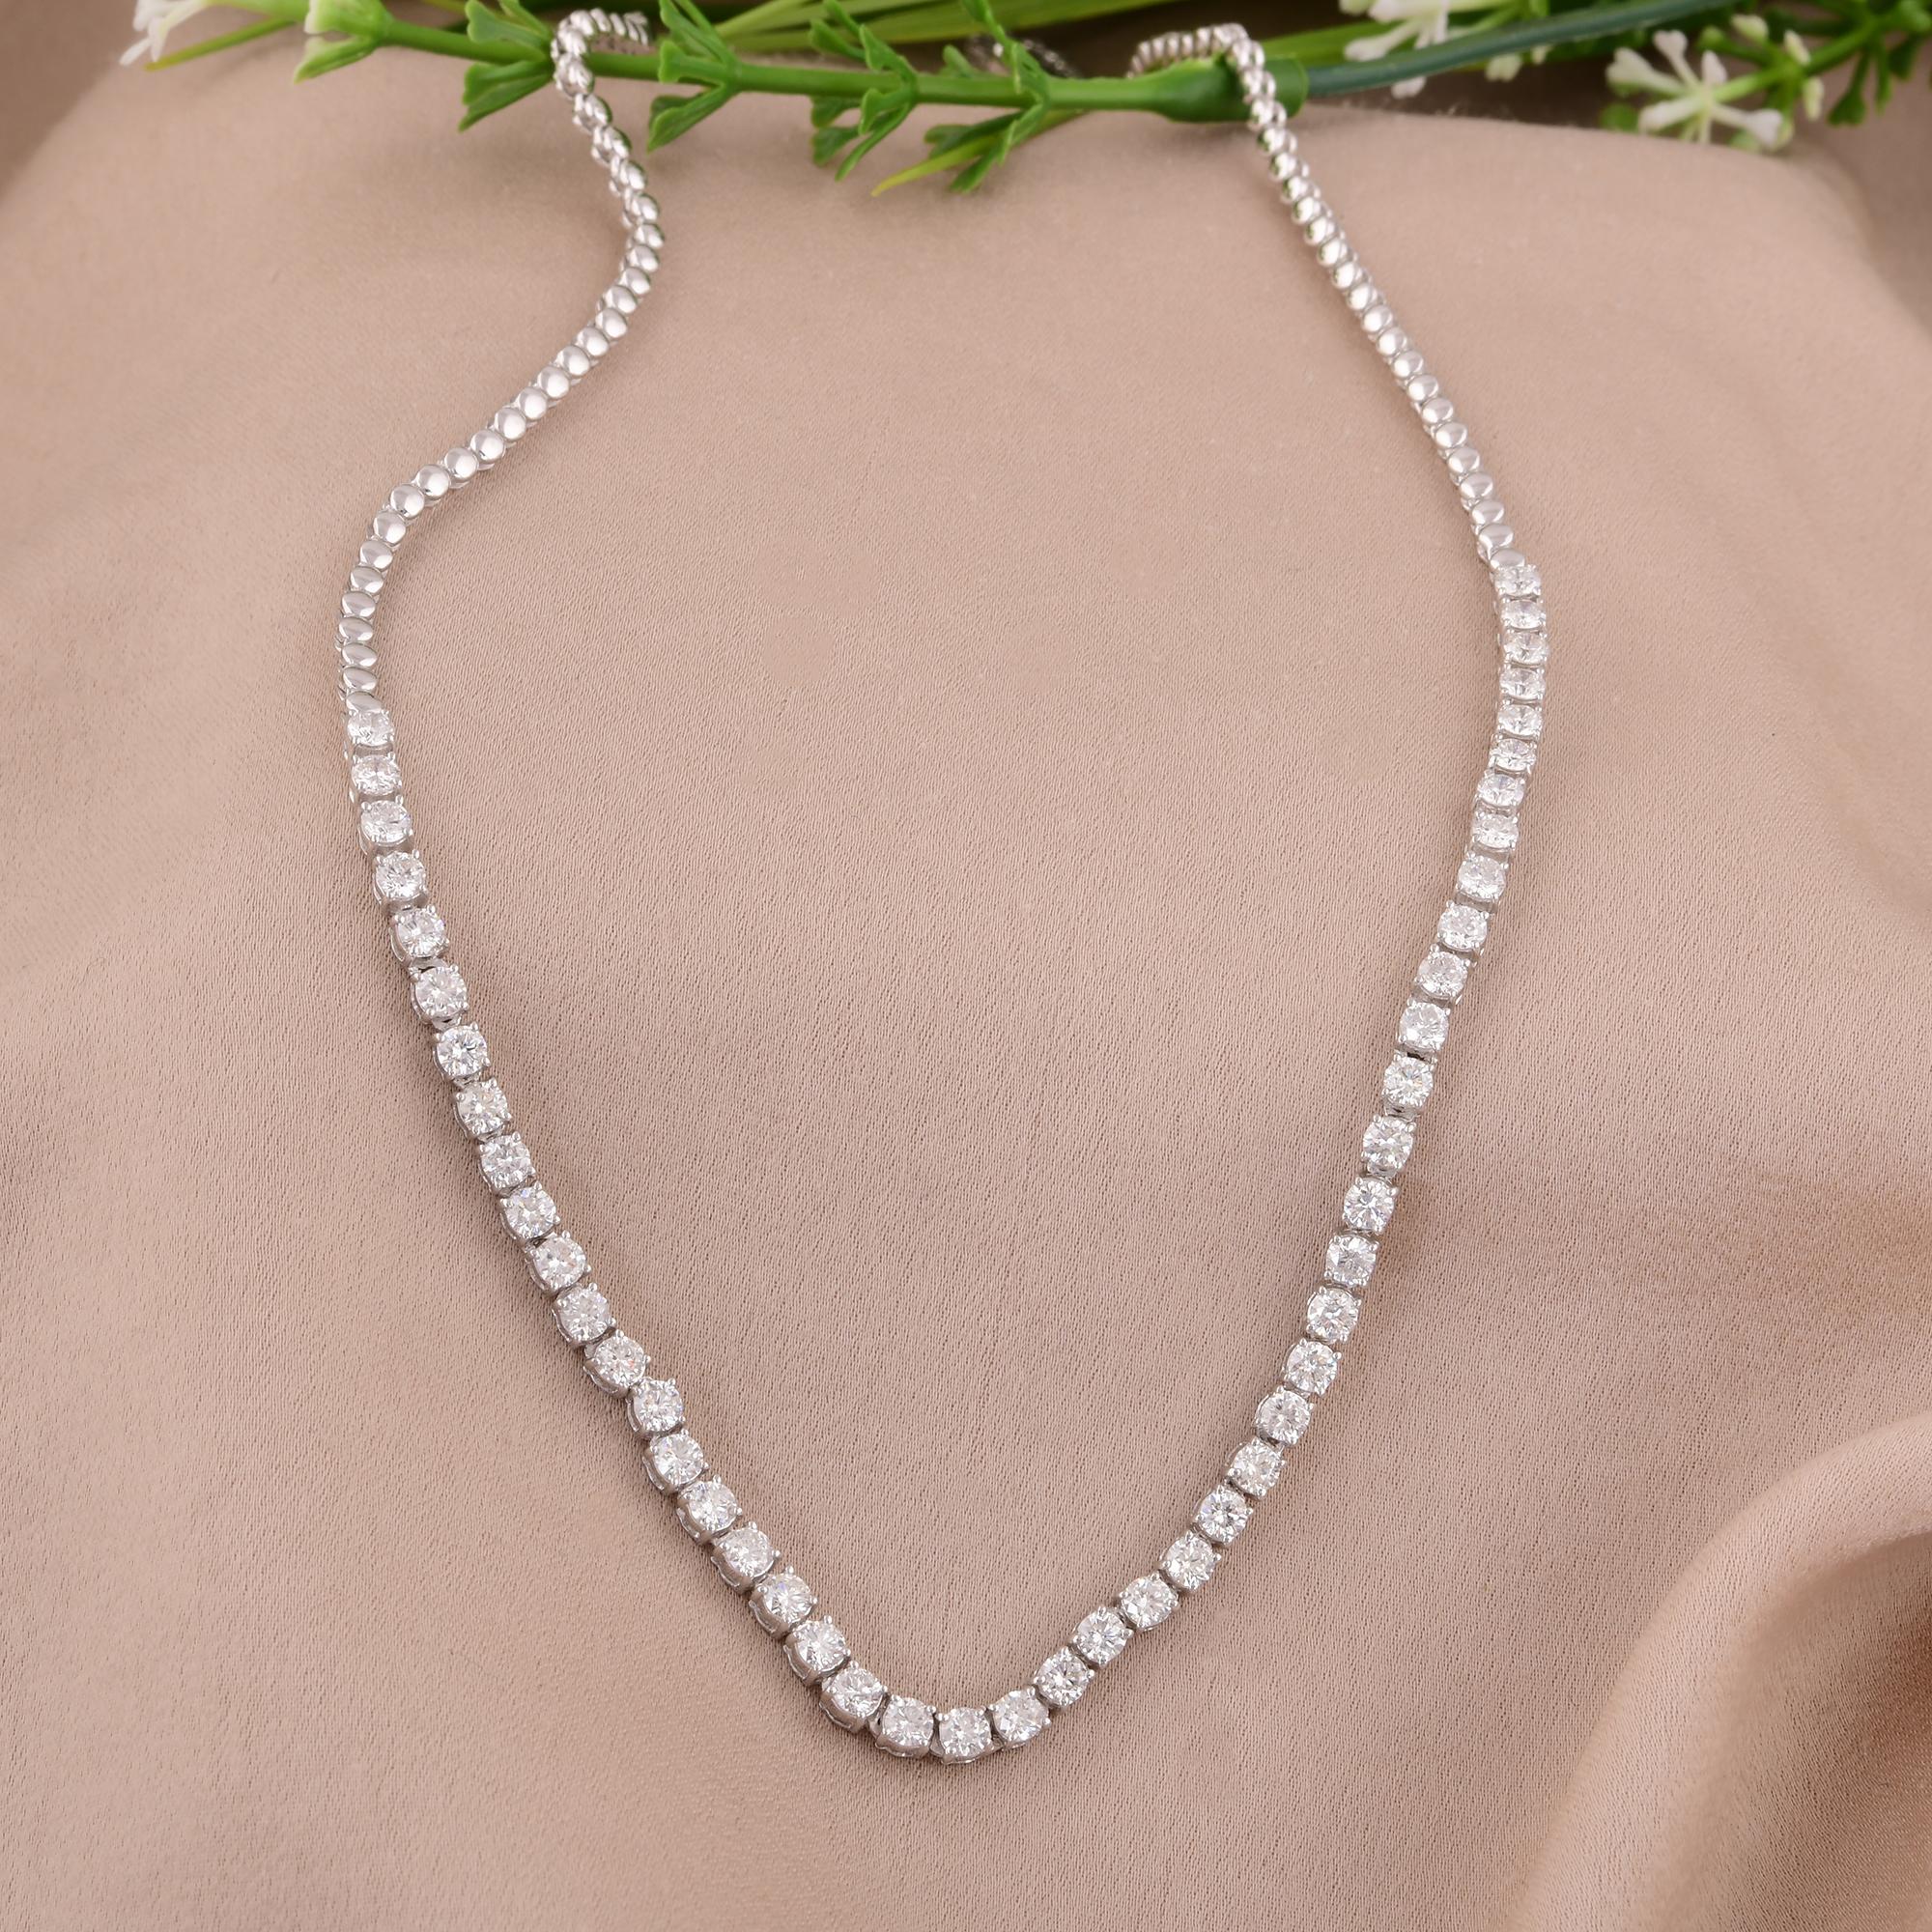 Women's Natural 3.81 Carat Round Diamond Necklace Solid 14 Karat White Gold Fine Jewelry For Sale